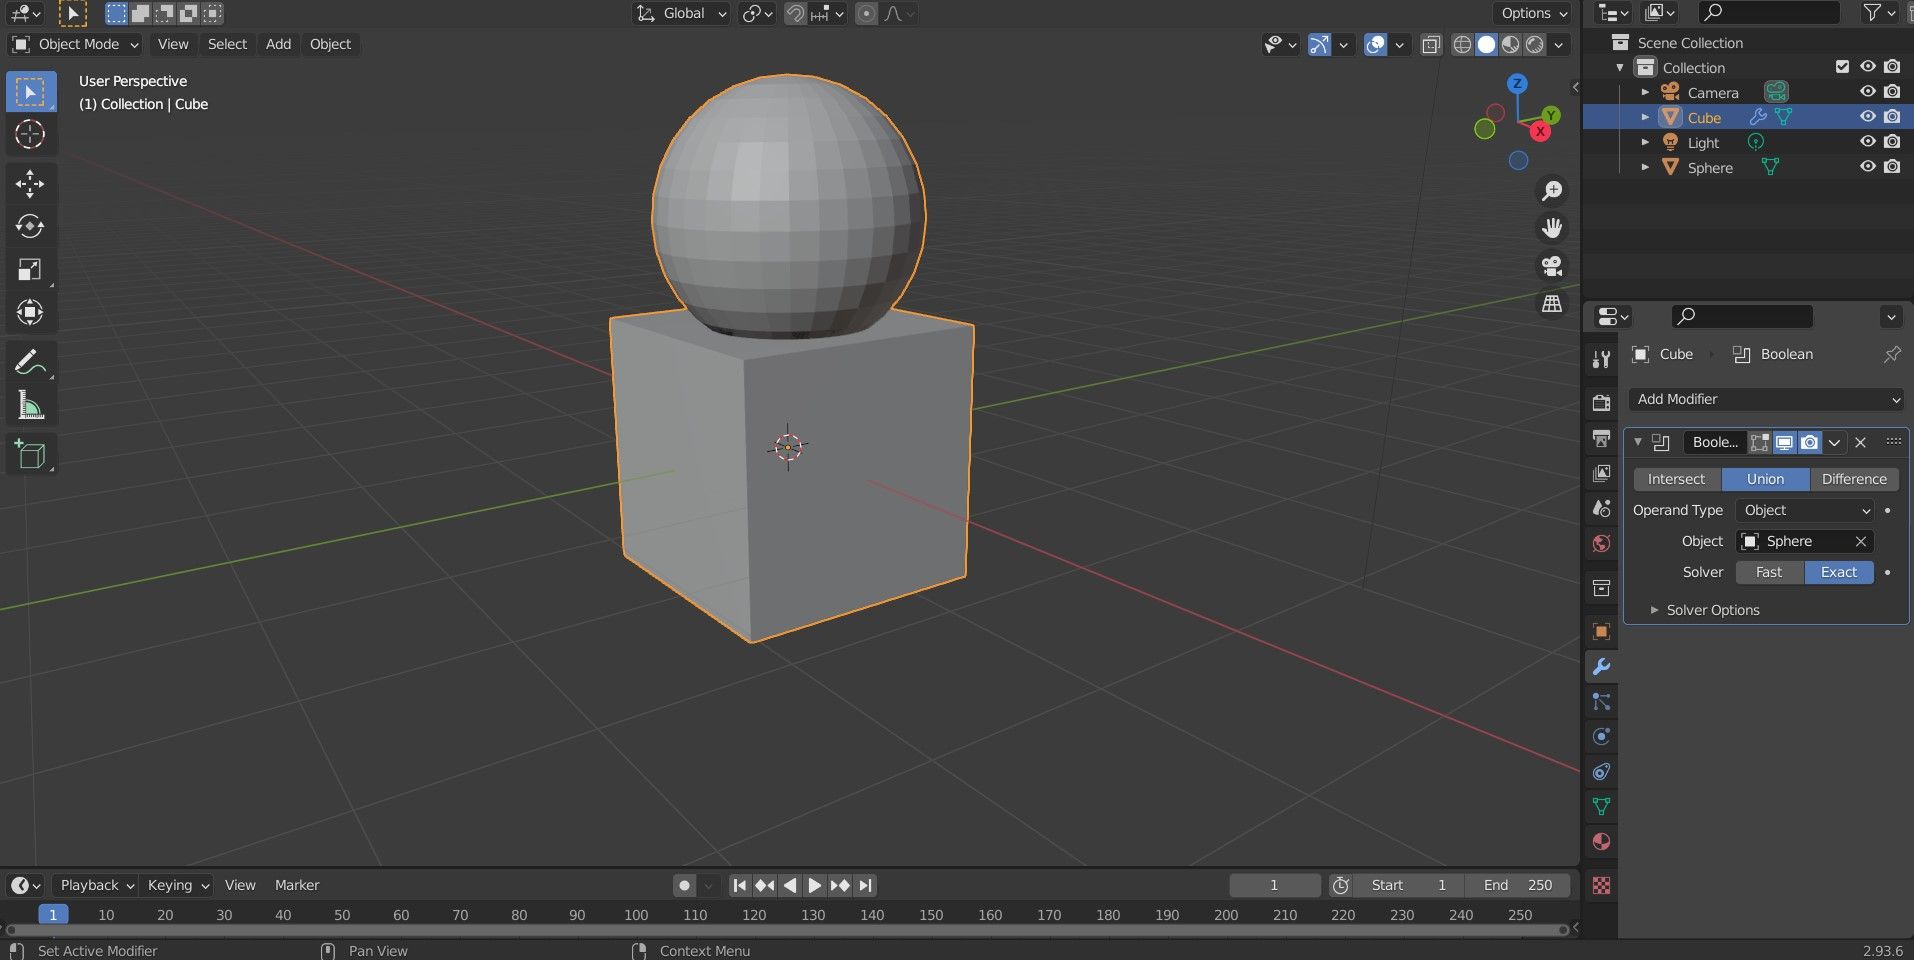 Adding Objects in Blender